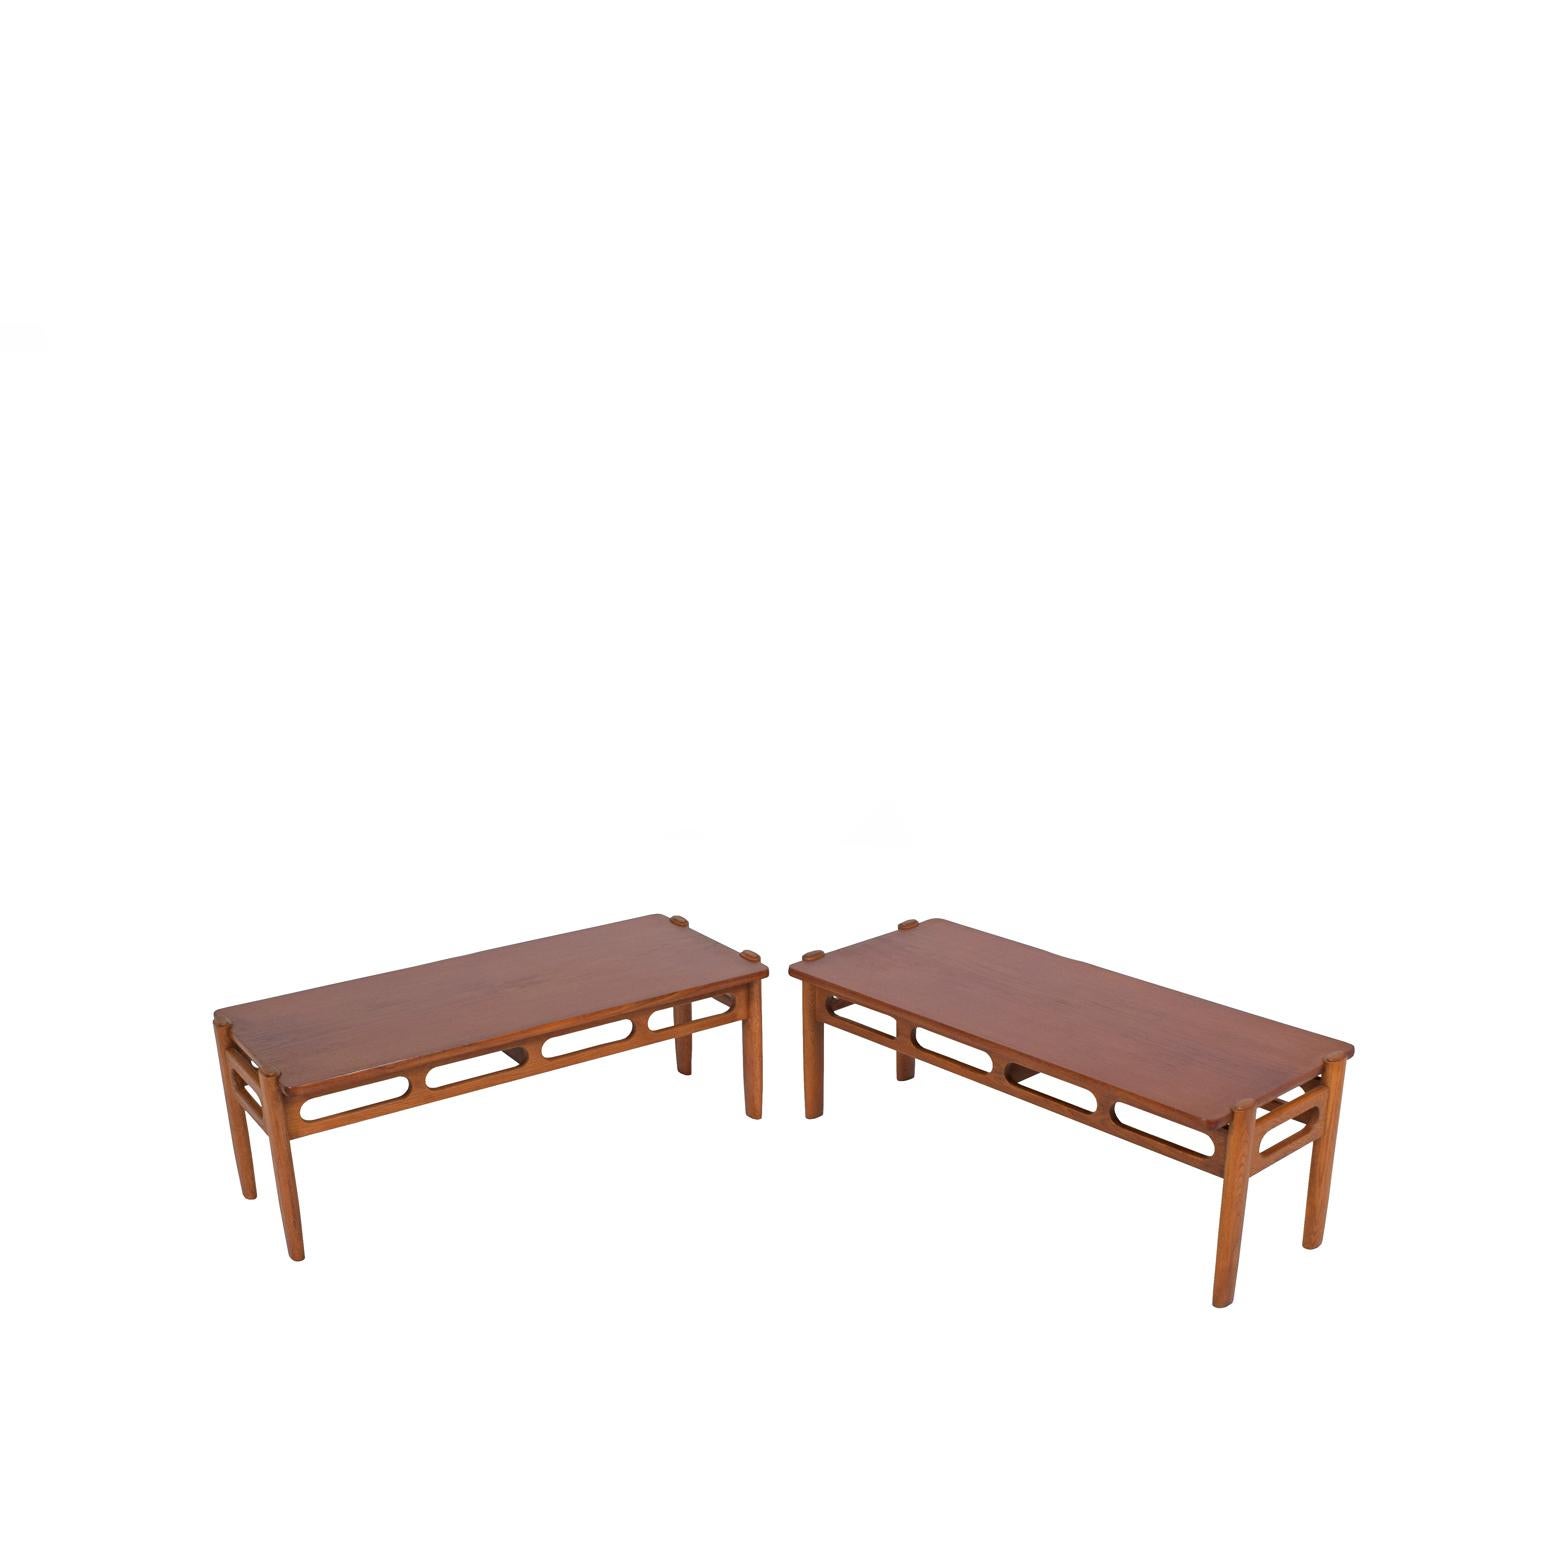 Rare benches /coffee tables solid oak frames with teak tops design by William Wattingt made by Mikeal Larsen cabinetmaker in 1950s.